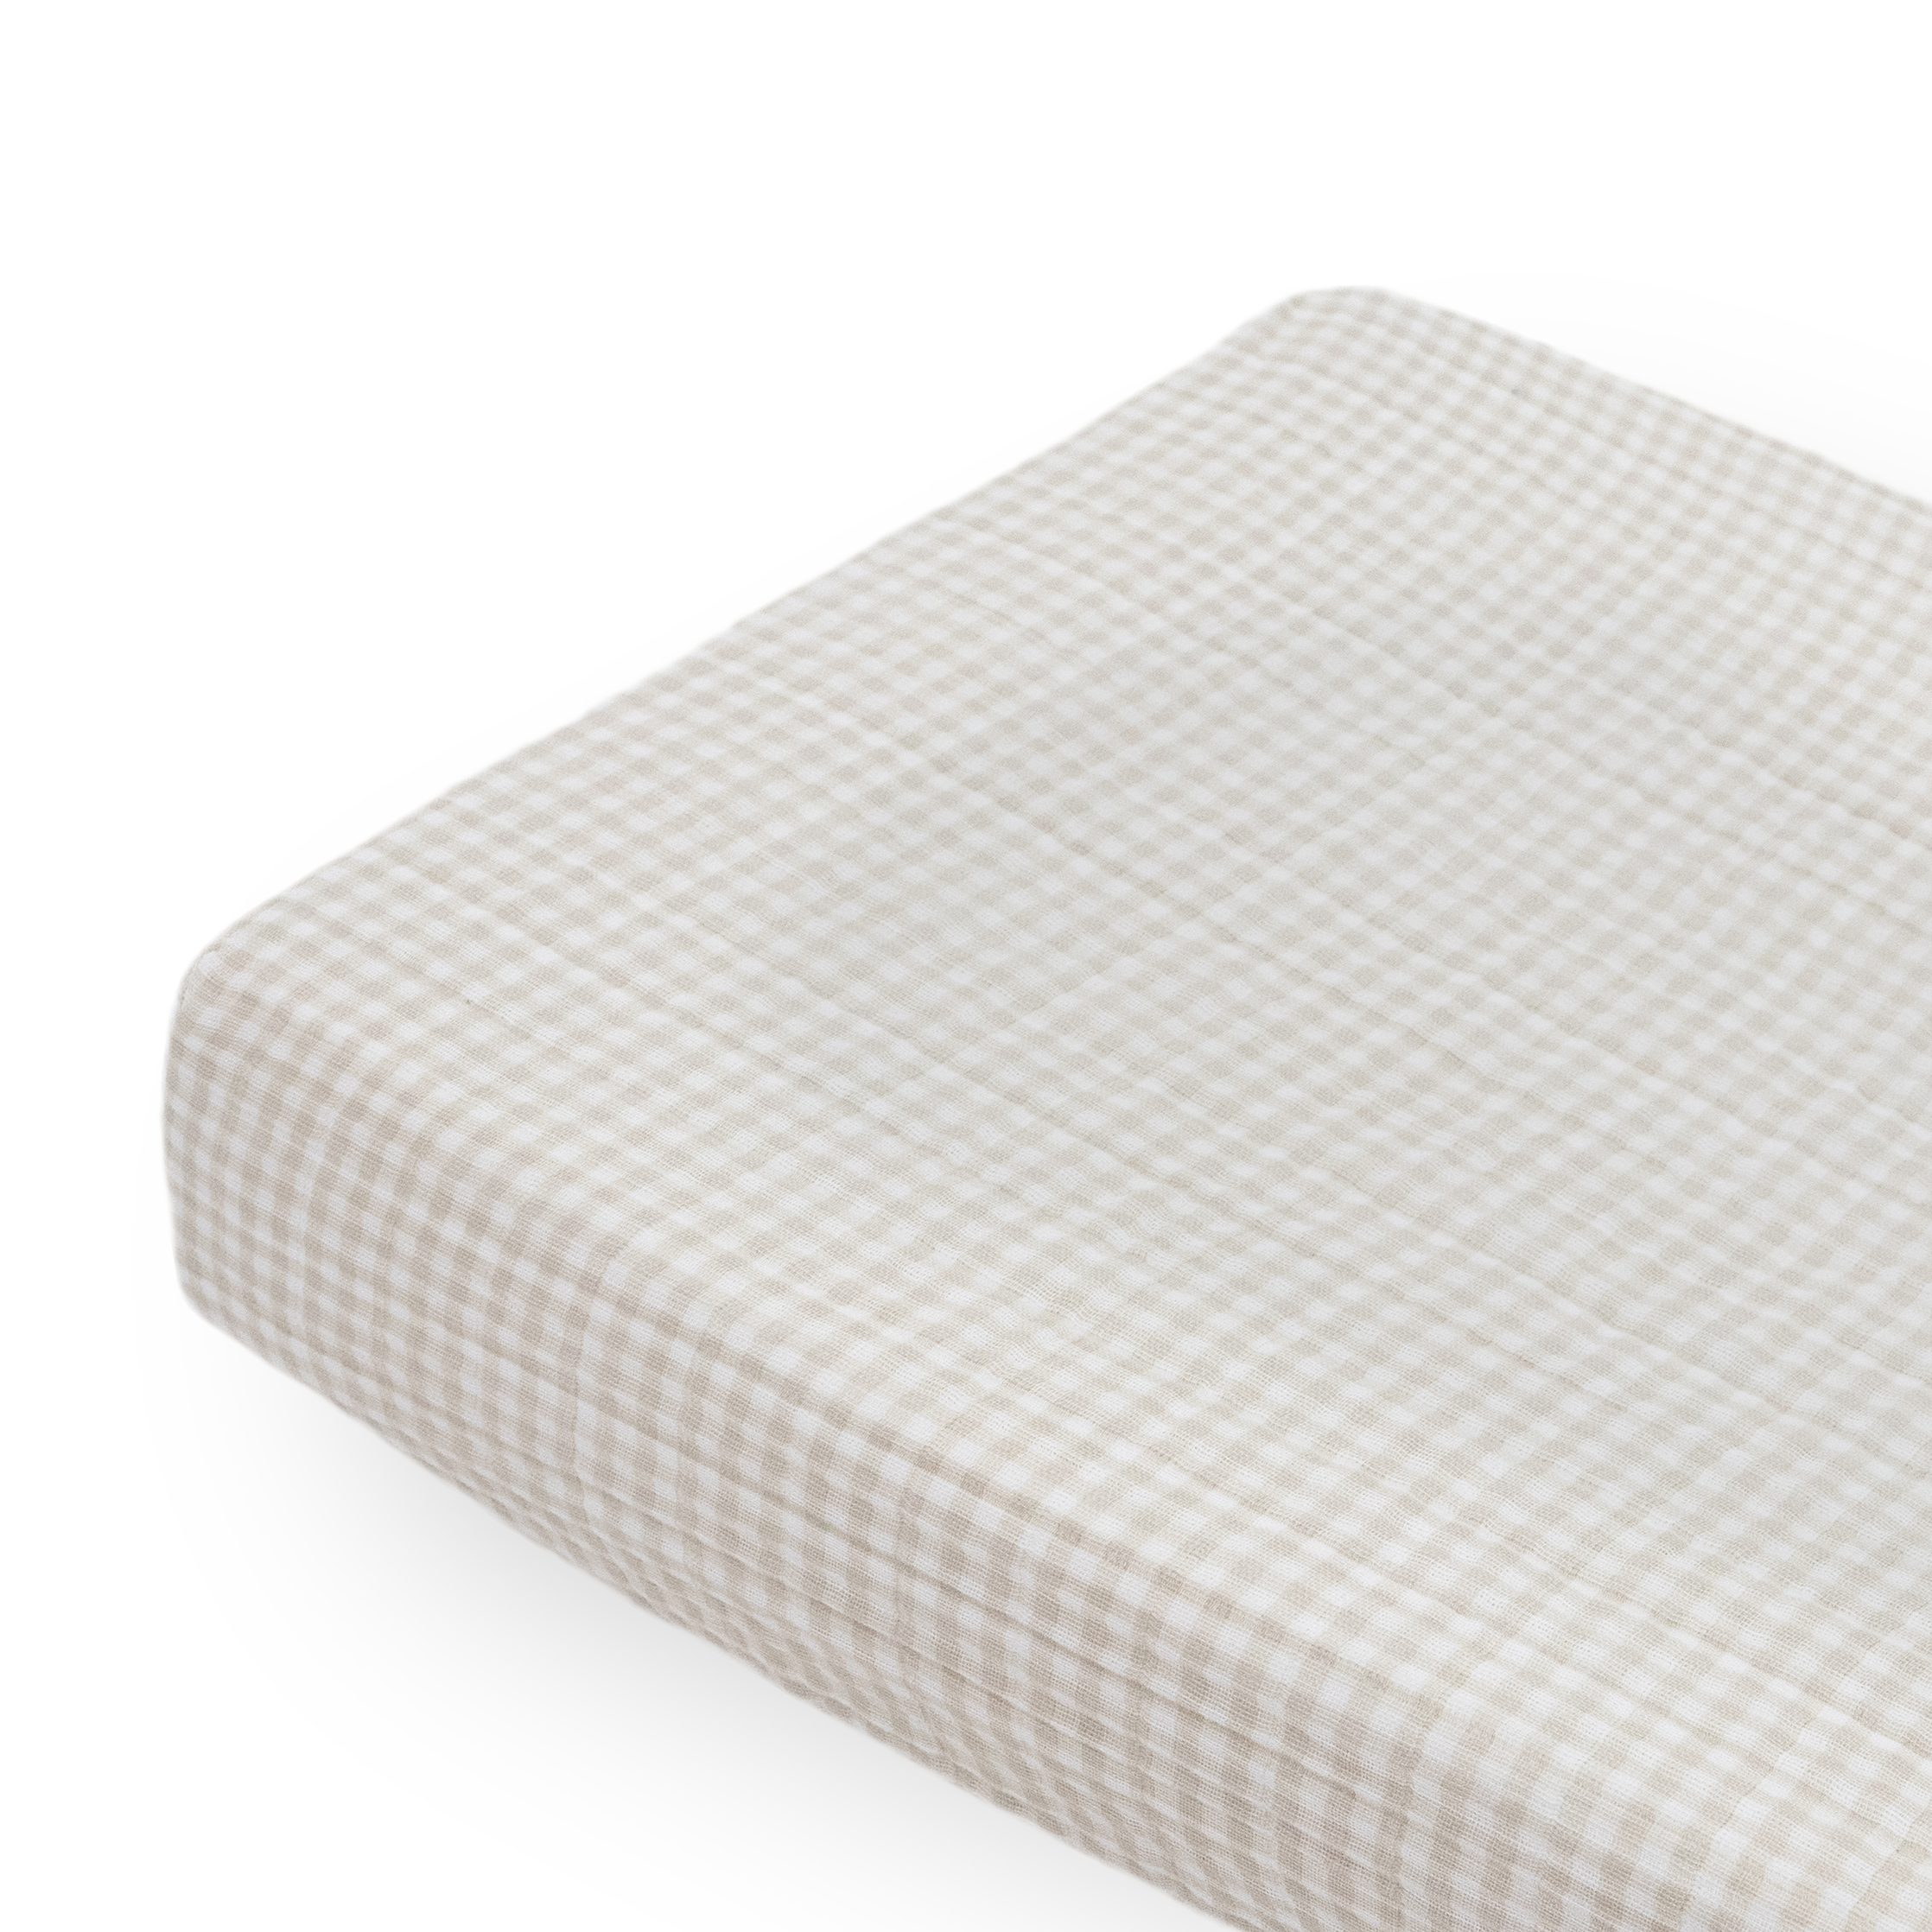 Cotton Muslin Changing Pad Cover - Tan Gingham